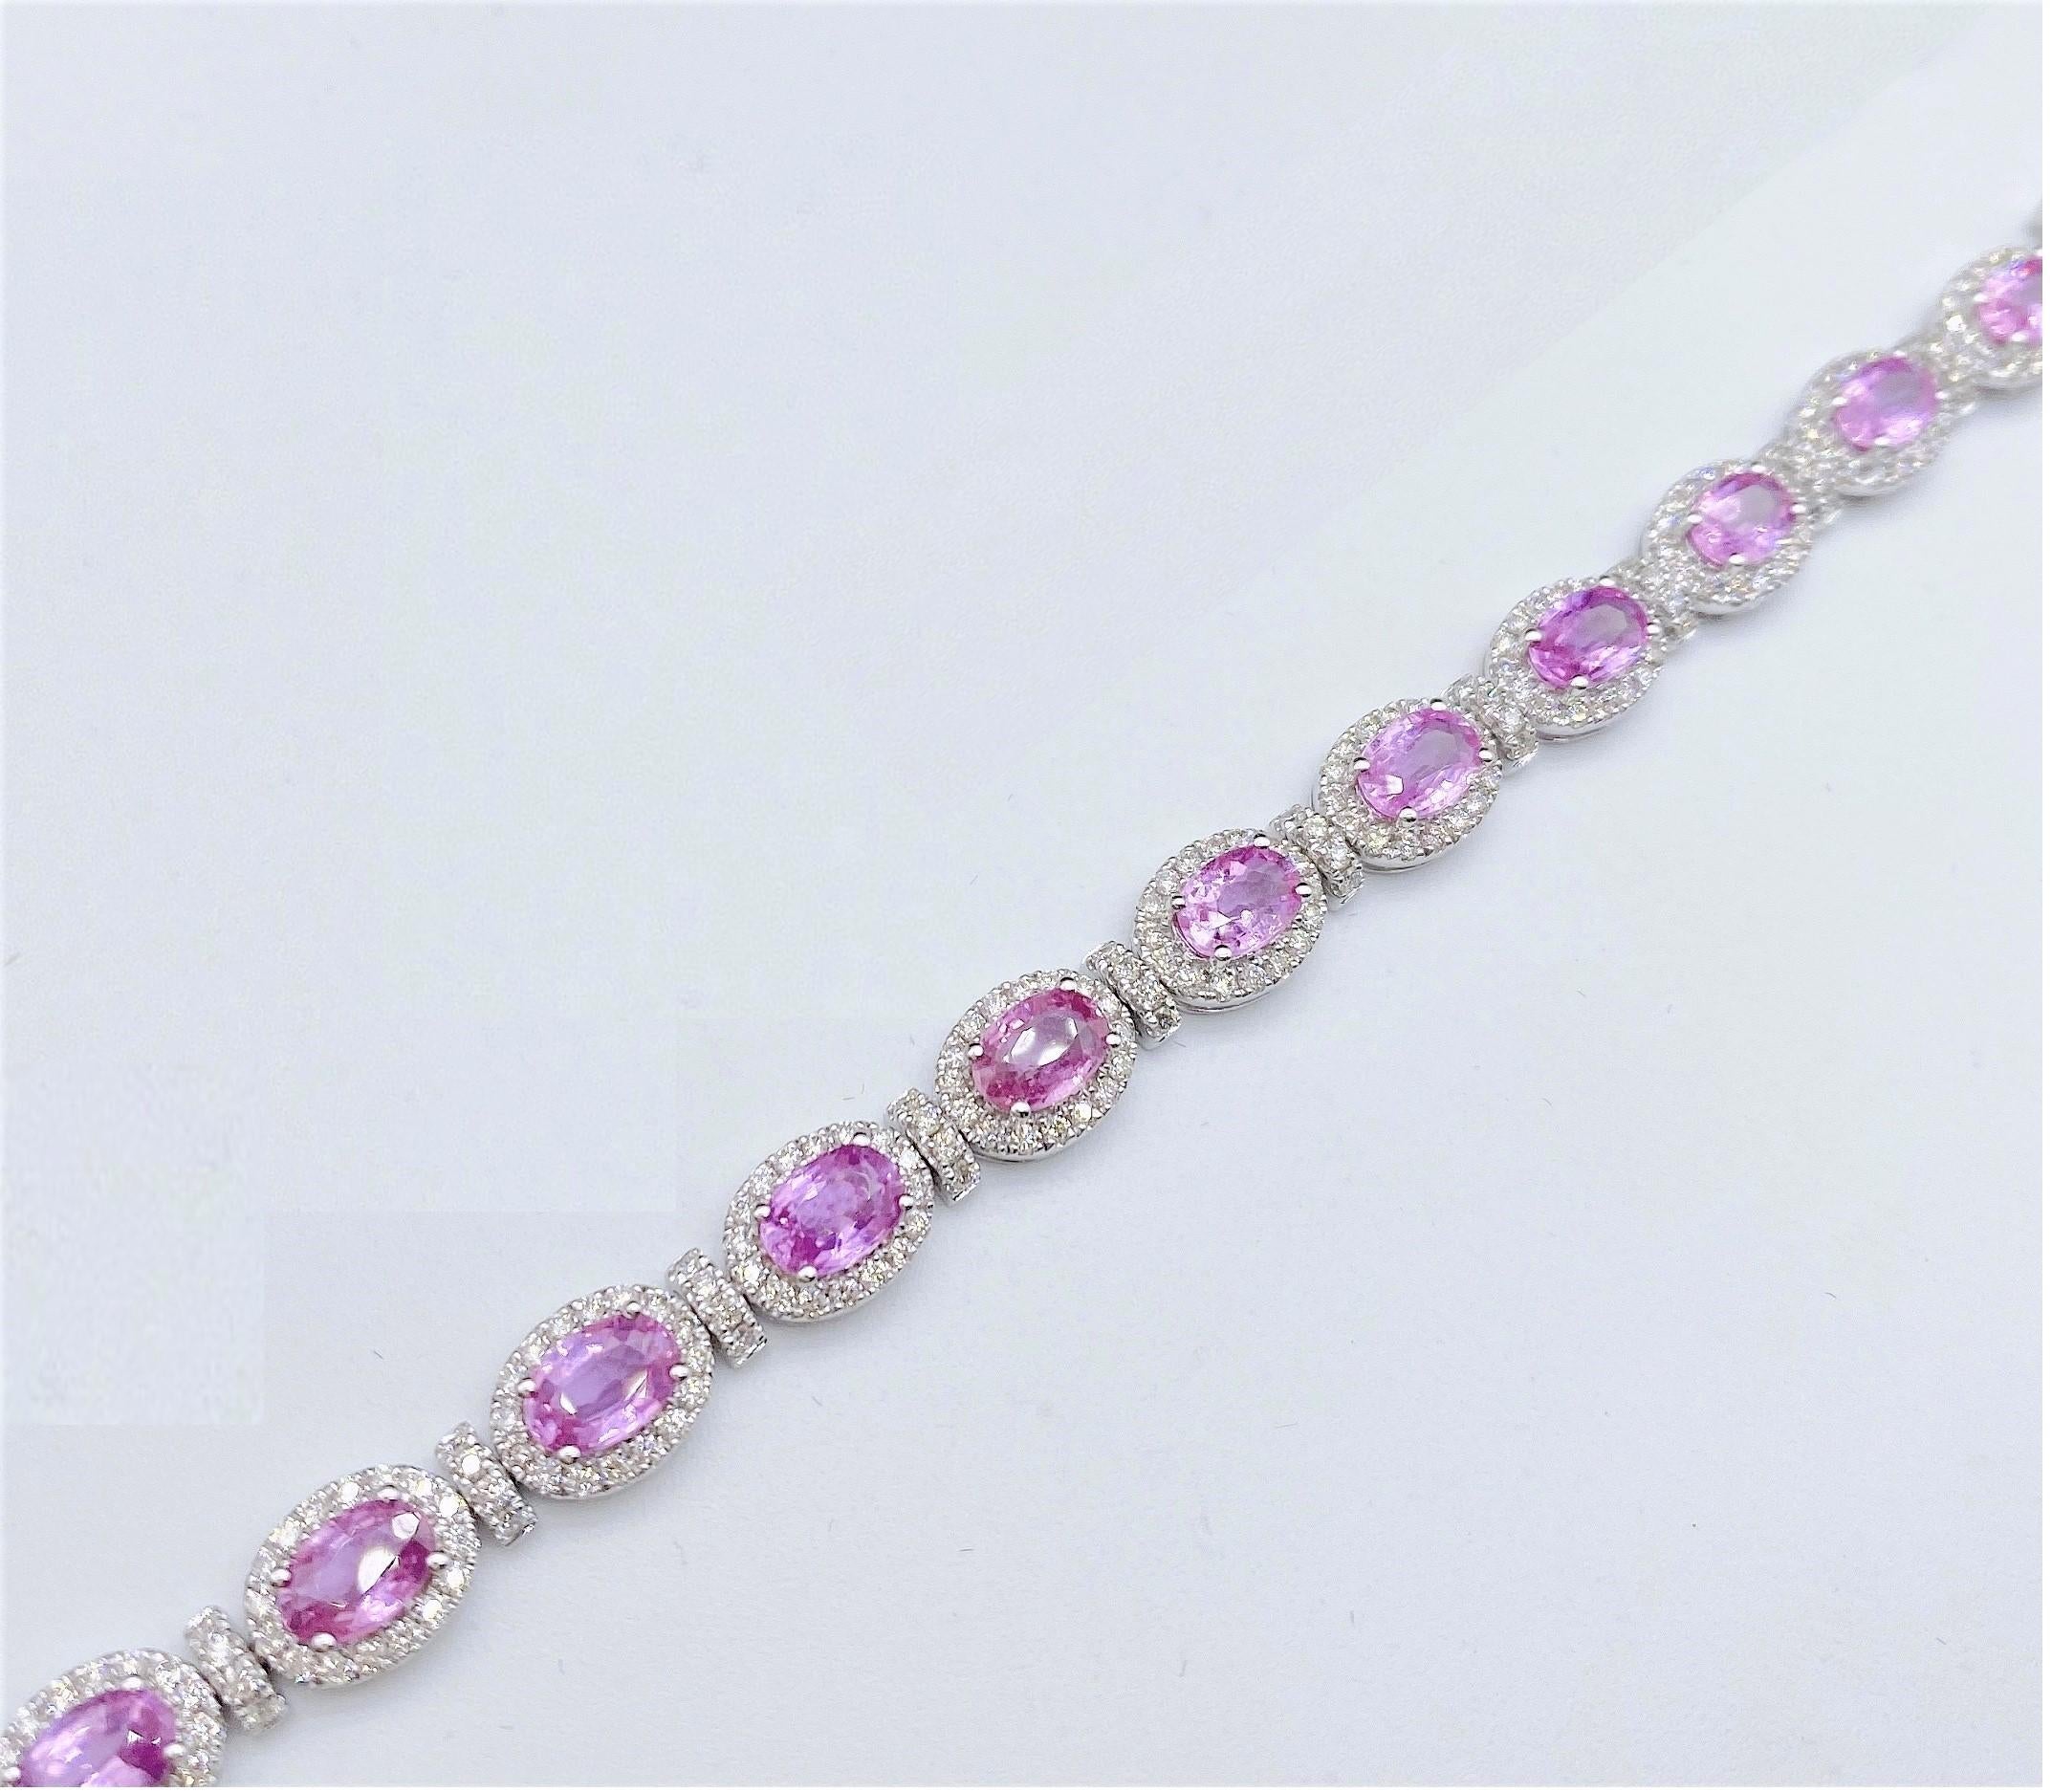 The Following Item we are offering is this Rare Important Radiant 18KT Gold Gorgeous Glittering and Sparkling Magnificent Fancy Oval Shaped Rare Pink and Diamond Bracelet. Bracelet Contains approx 10.50CTS of Beautiful Fancy Gorgeous Oval Cut Pink